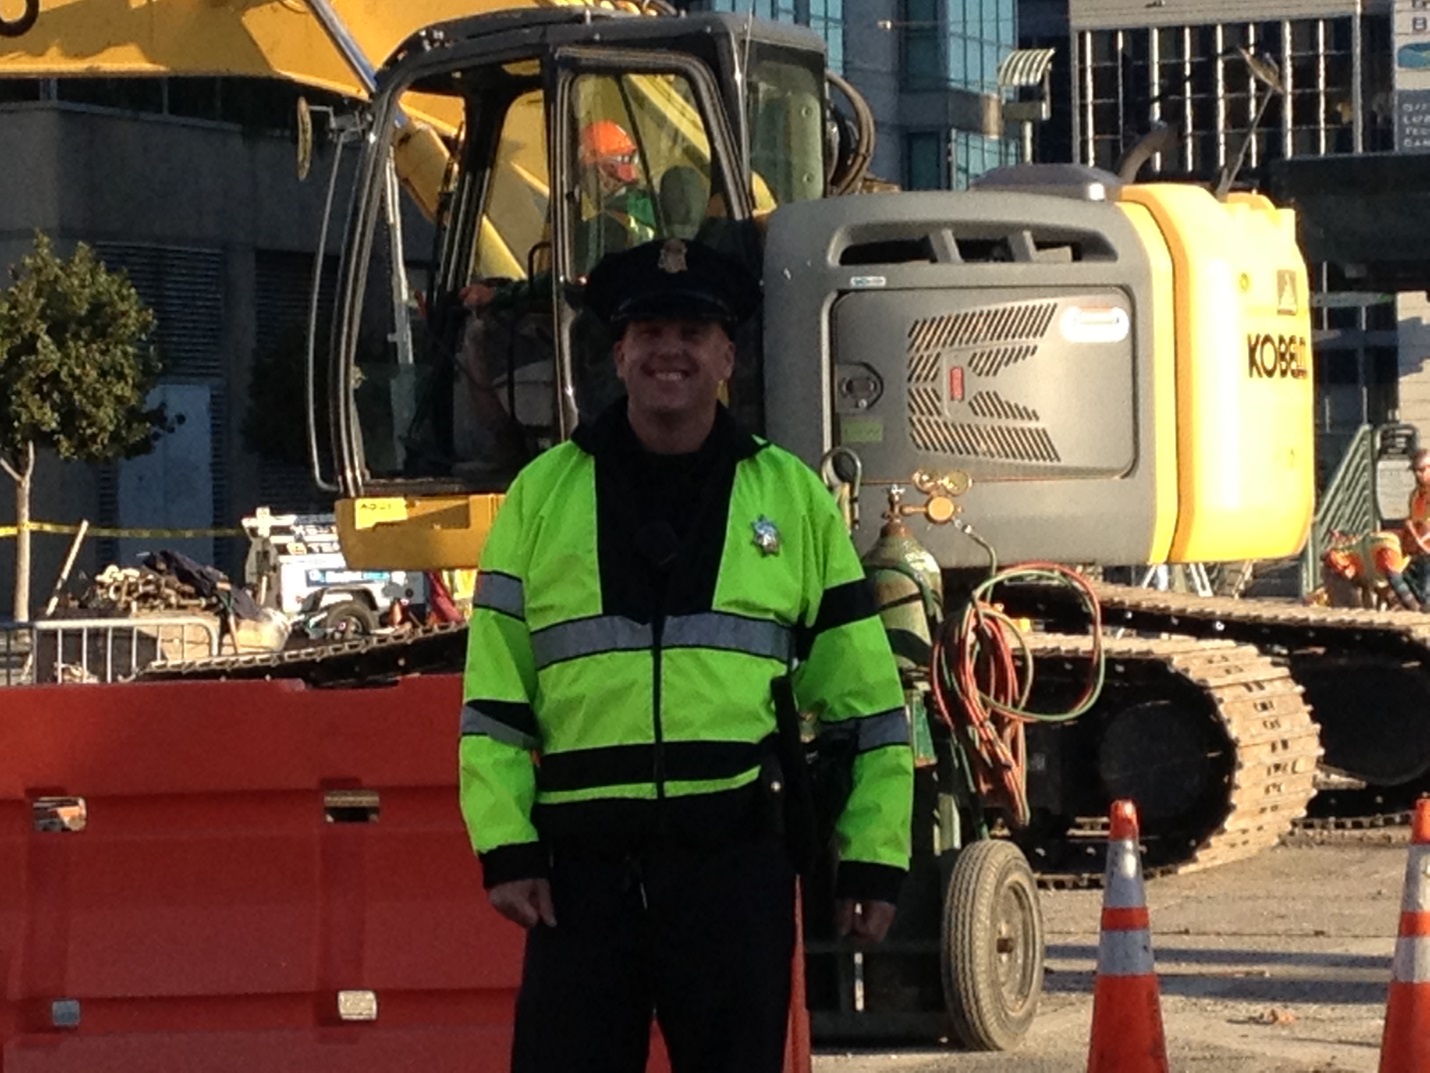 A police officer wearing a reflective safety jacket stands in front of construction equipment.